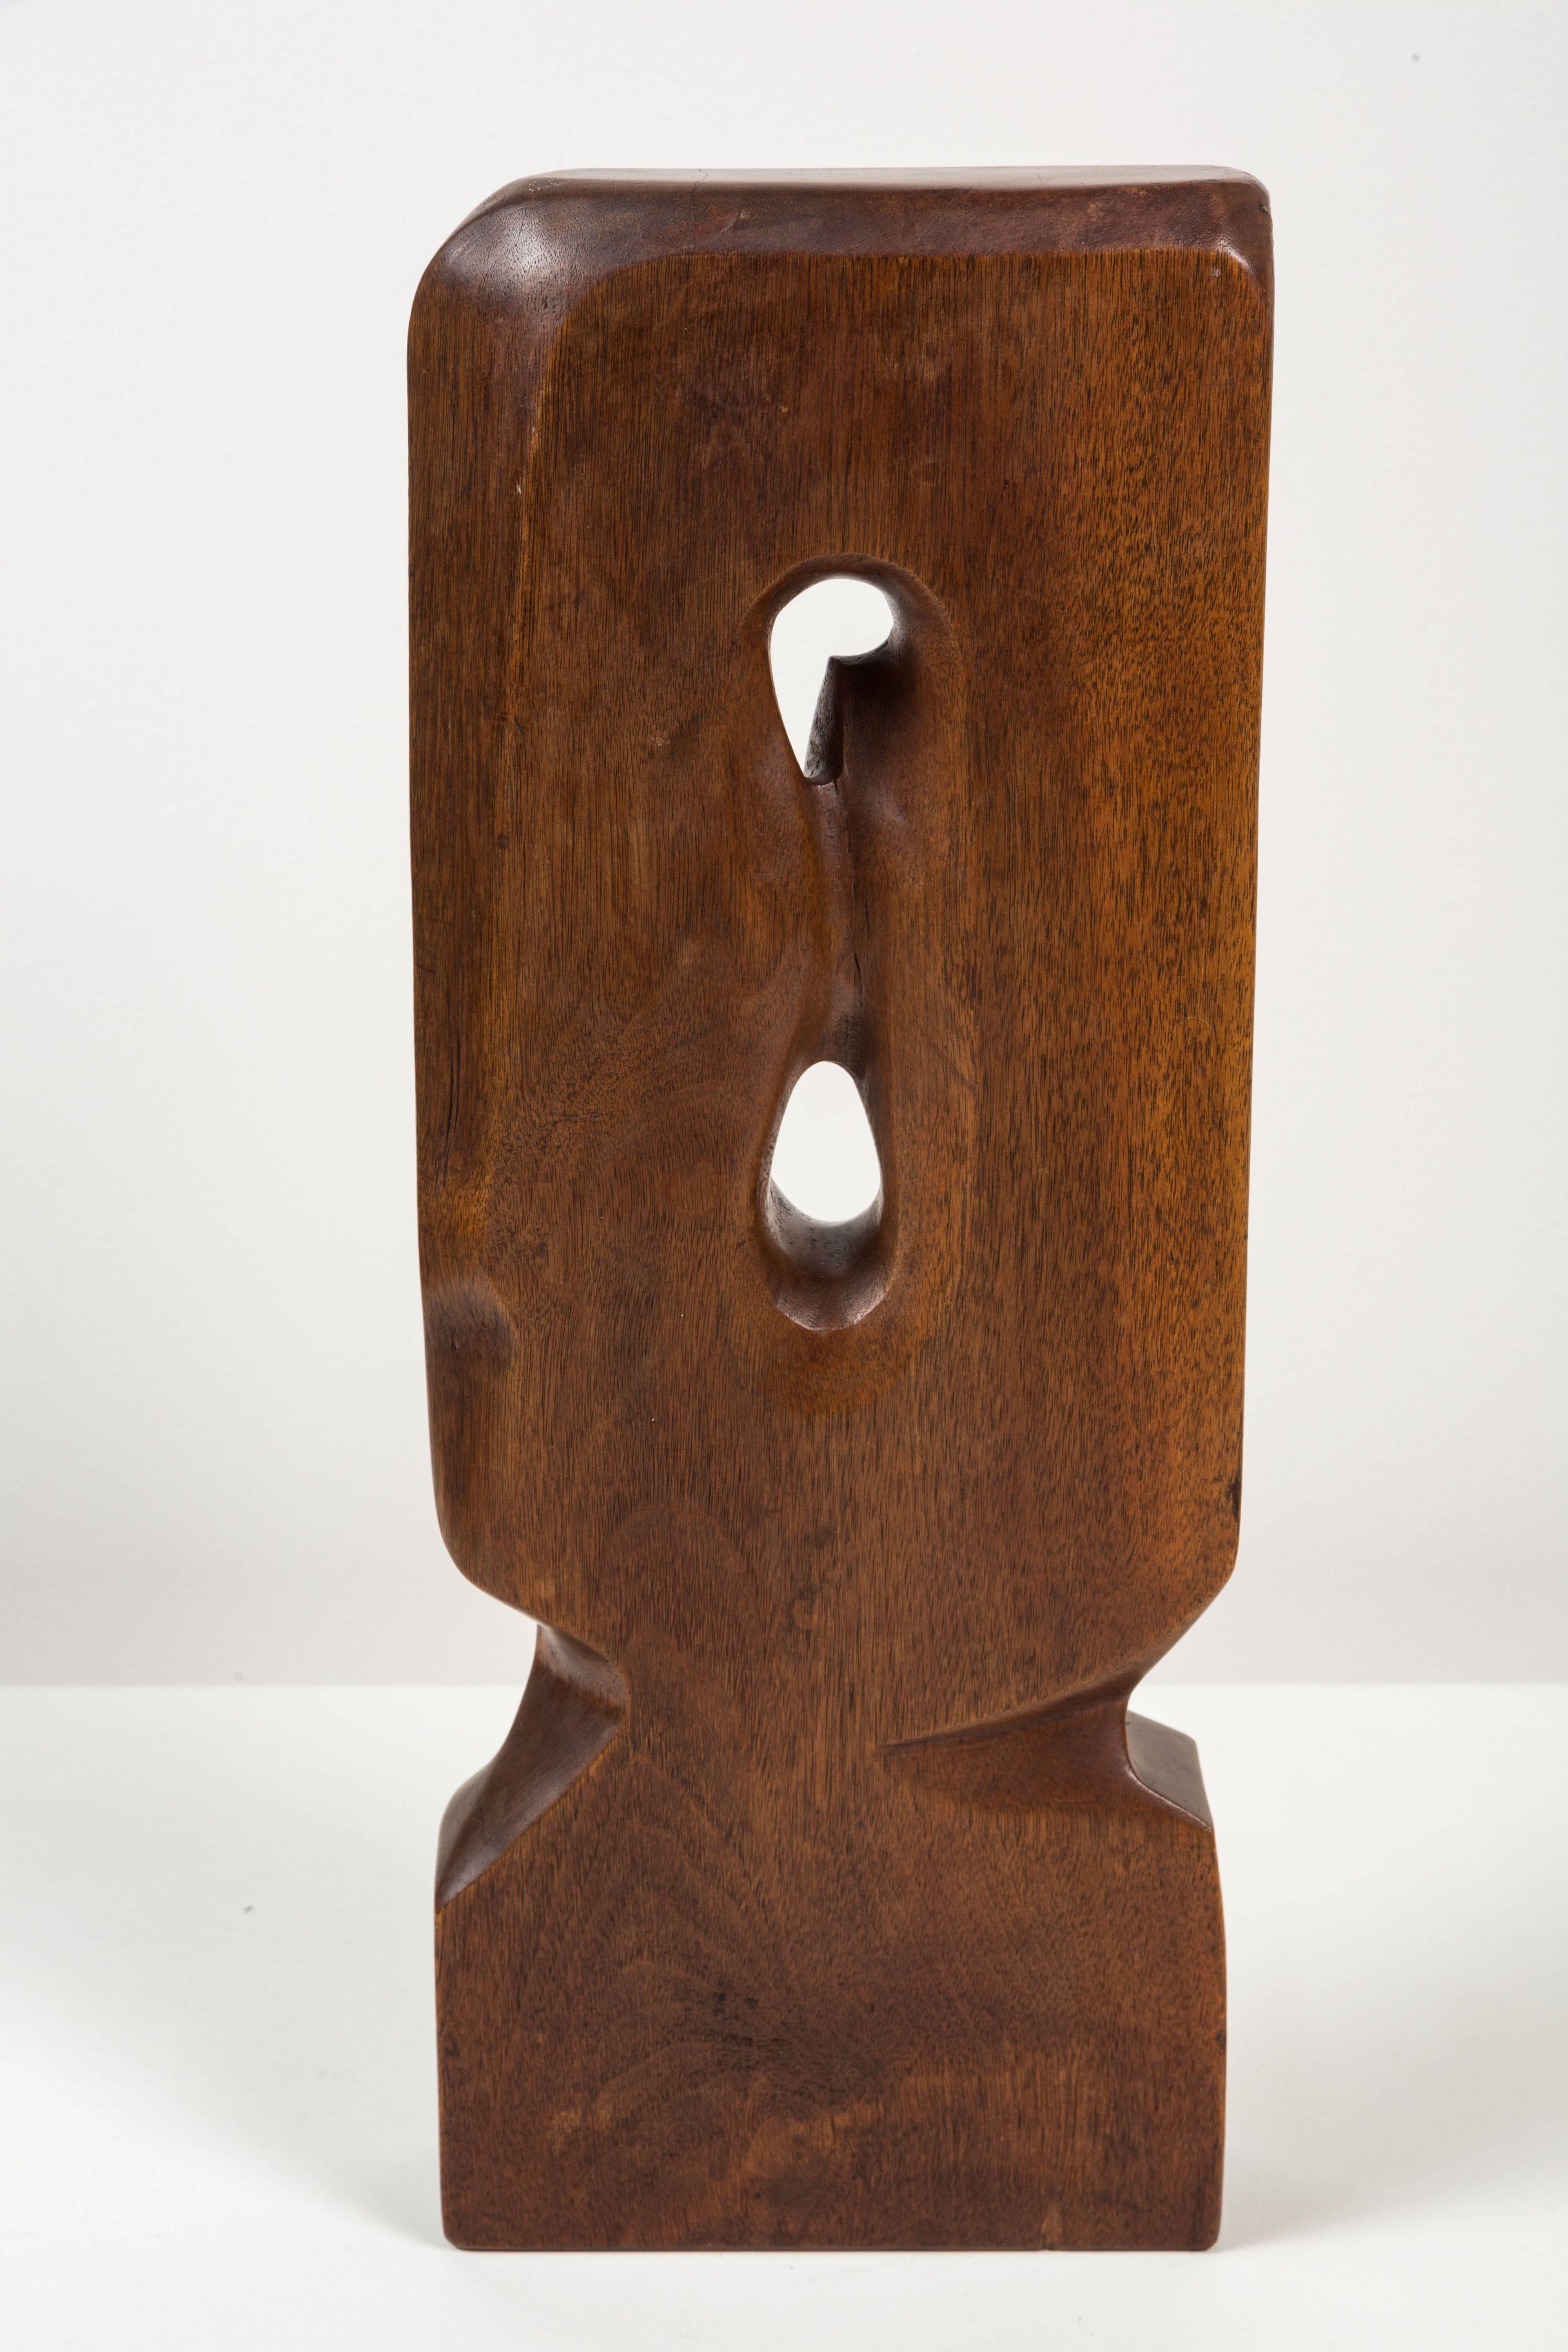 Biomorphic, organic carved wood sculpture. Signed Birtles, made in California, circa 1967.